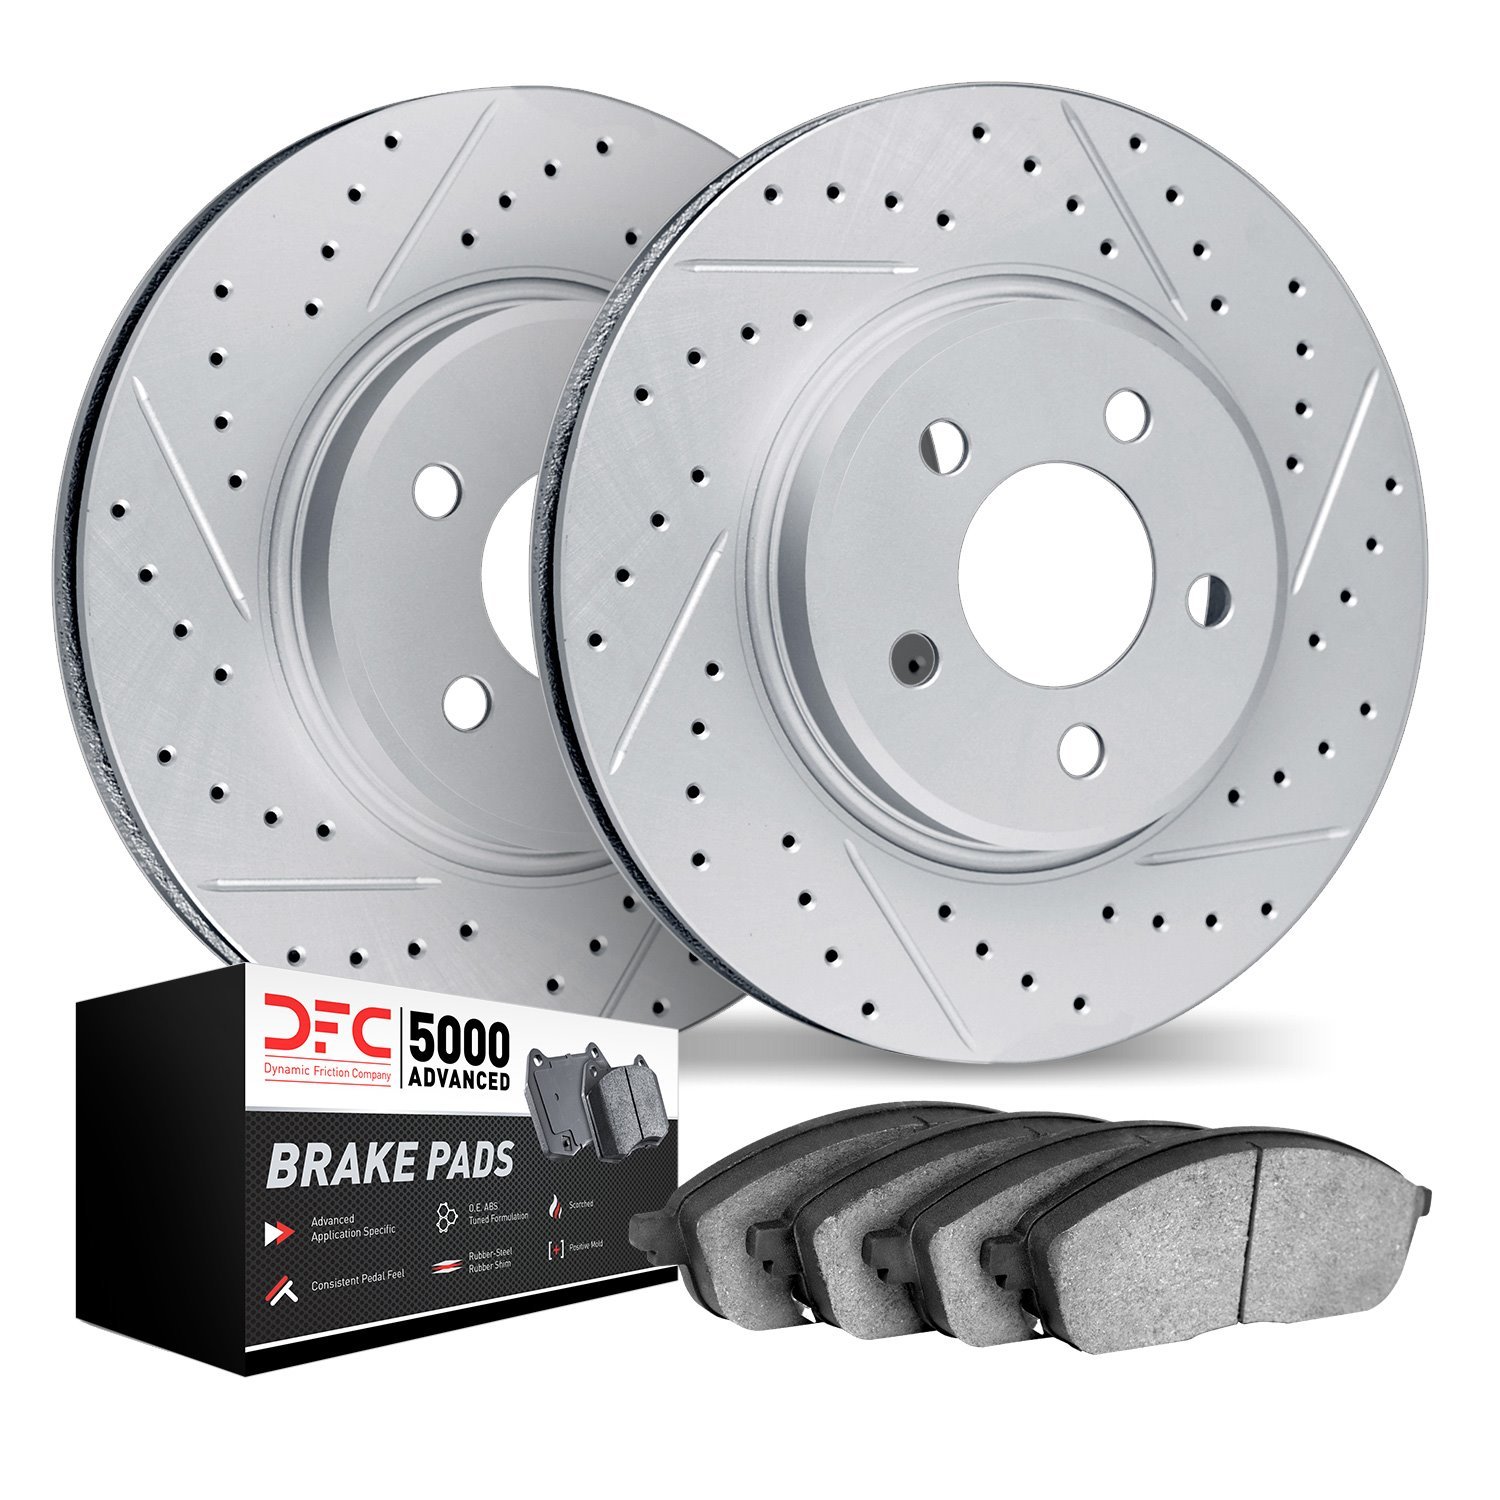 2502-73079 Geoperformance Drilled/Slotted Rotors w/5000 Advanced Brake Pads Kit, 2019-2020 Audi/Volkswagen, Position: Rear